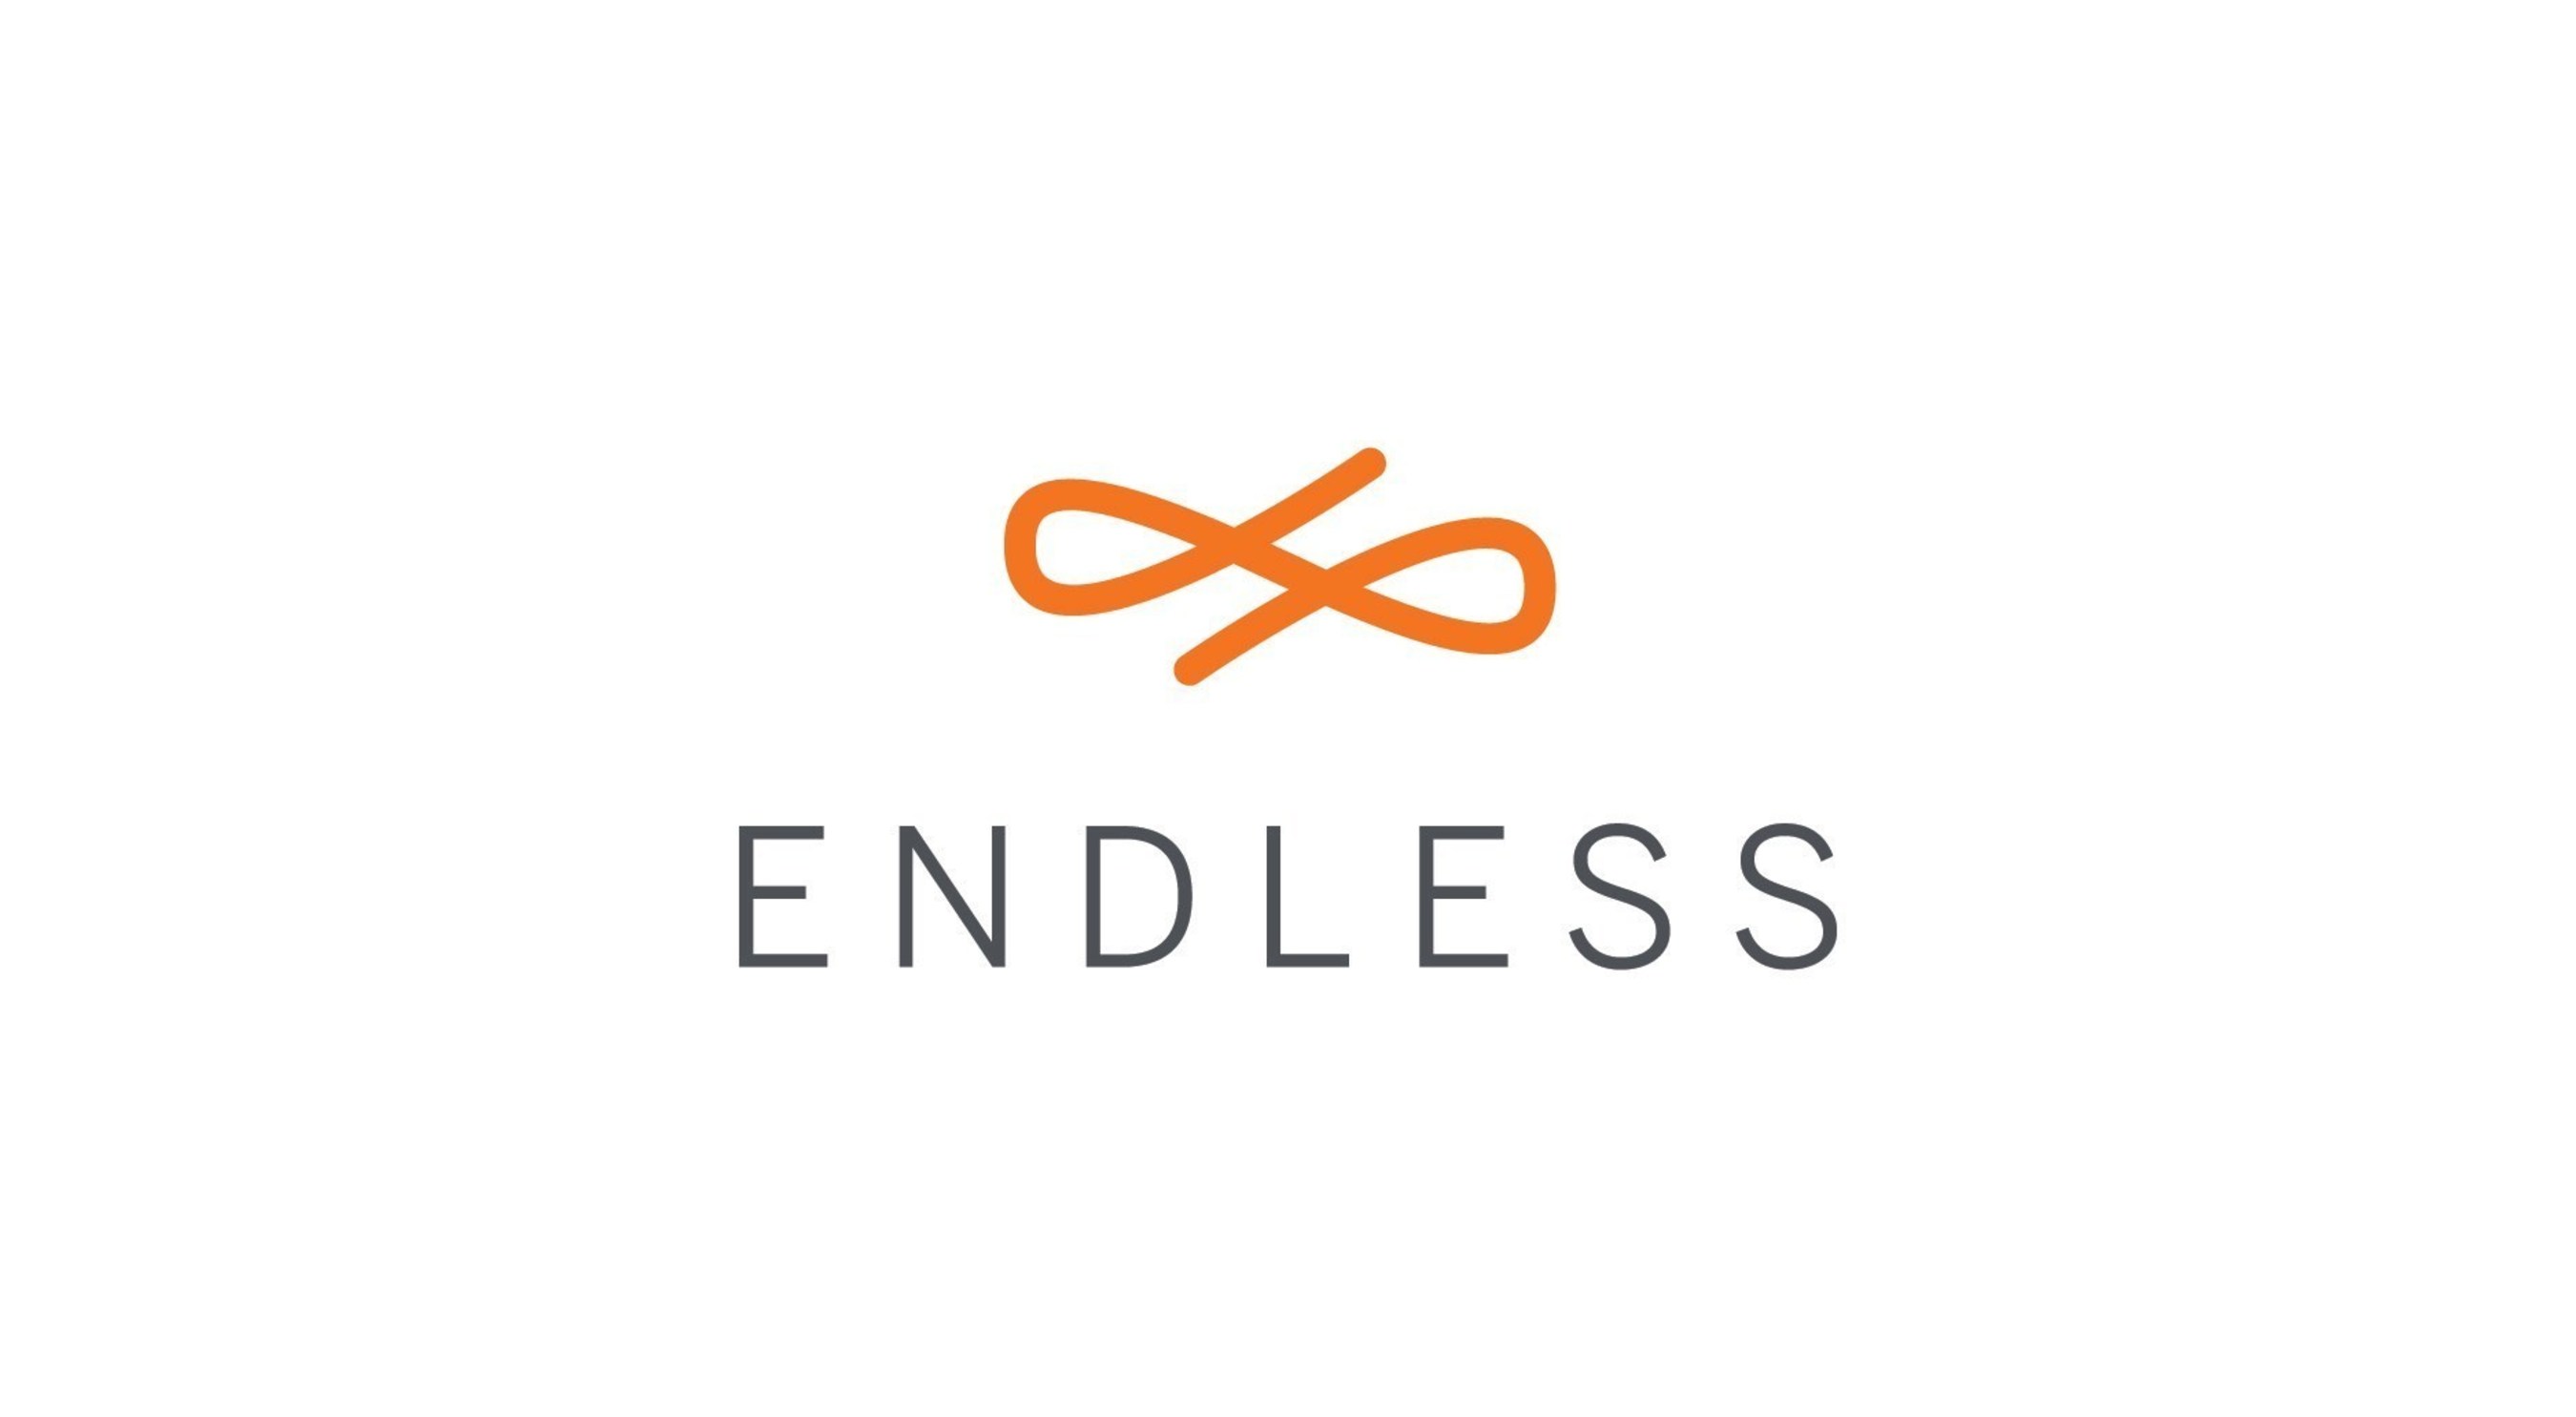 Endless Delivers Computers Tailor-Made for the Developing World